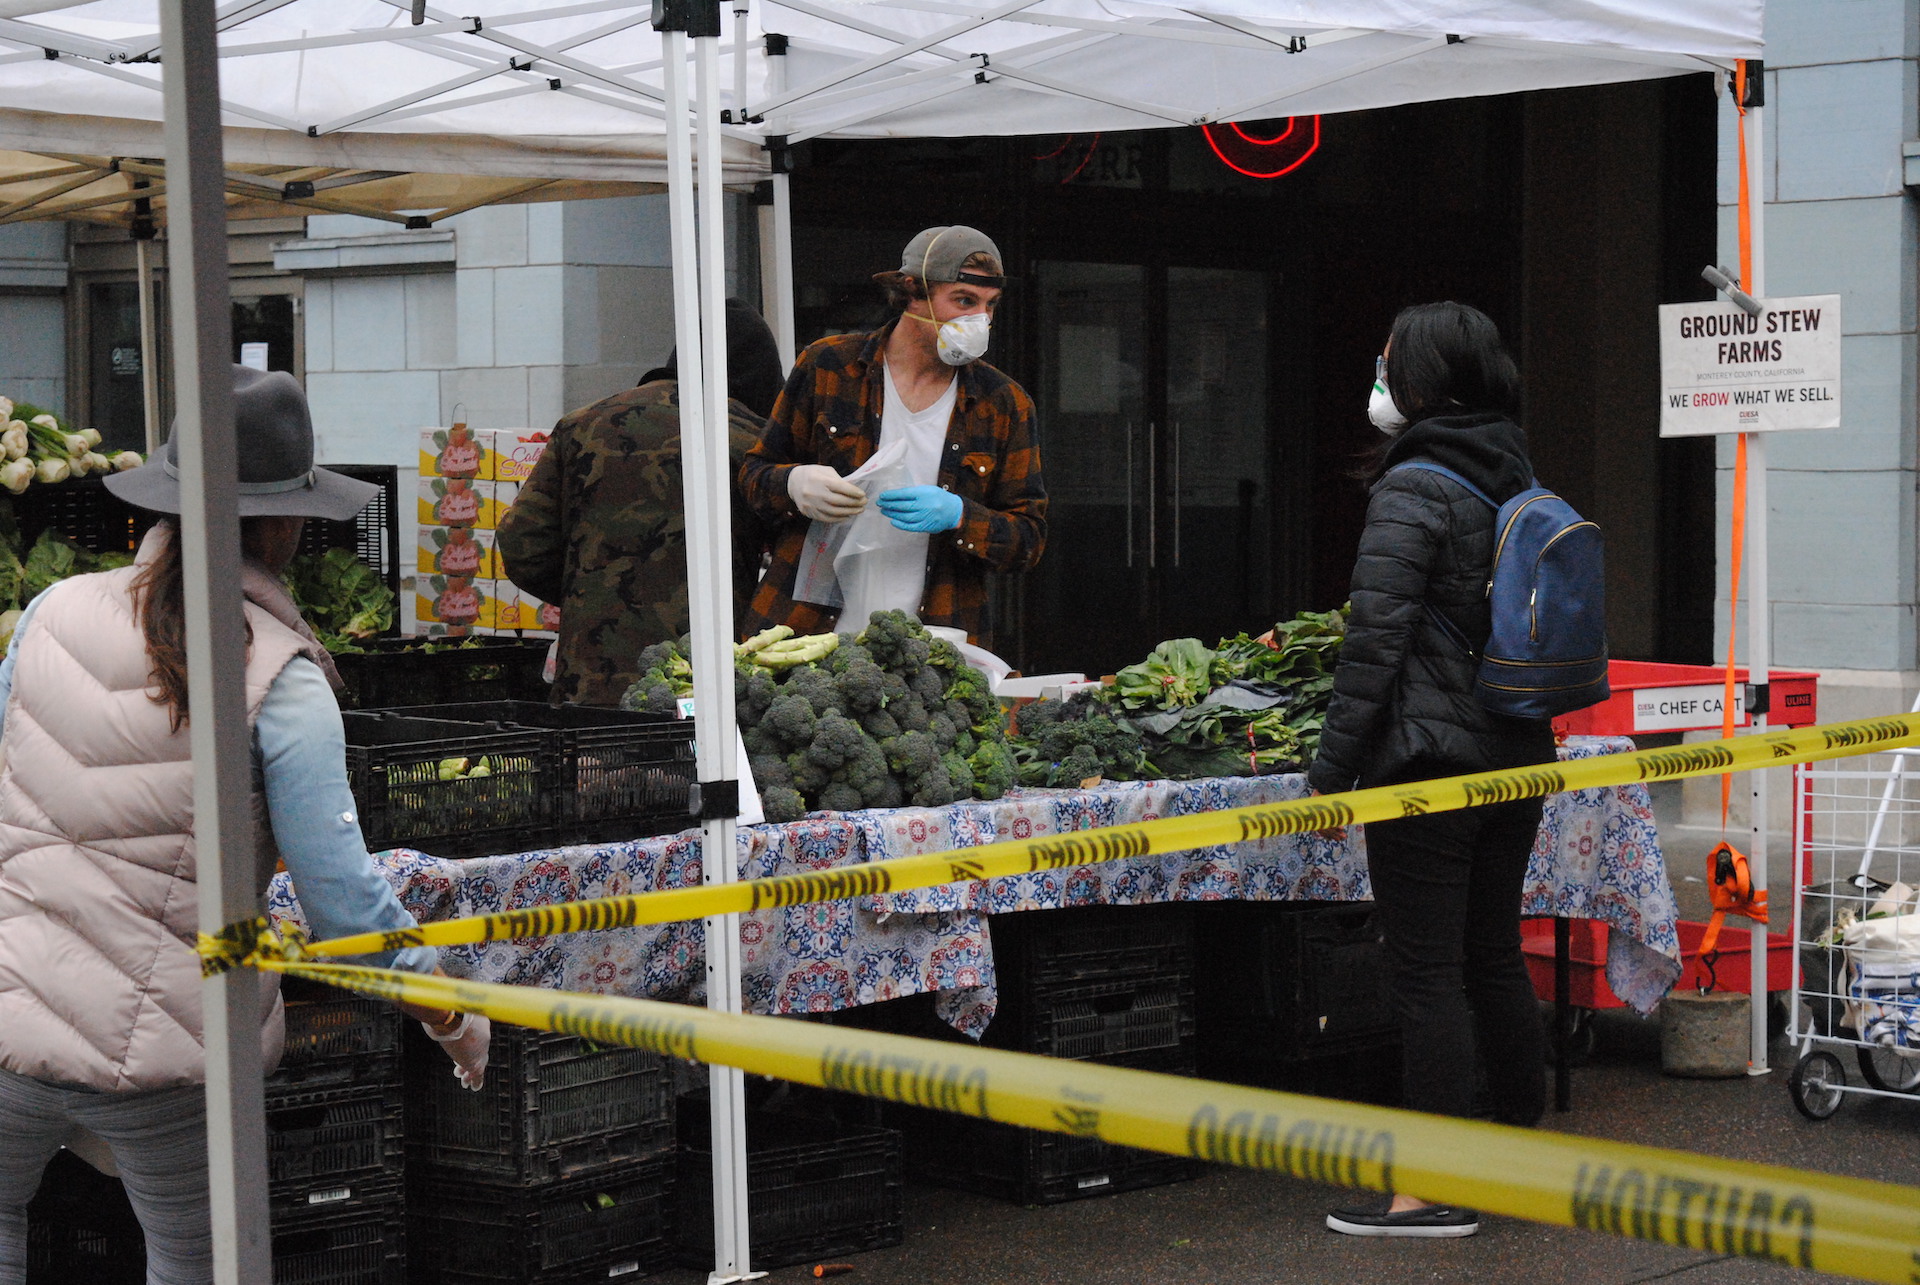 Many small farmers across the state depend on farmers markets and restaurants orders that have depleted since shelter-in-place was instituted.